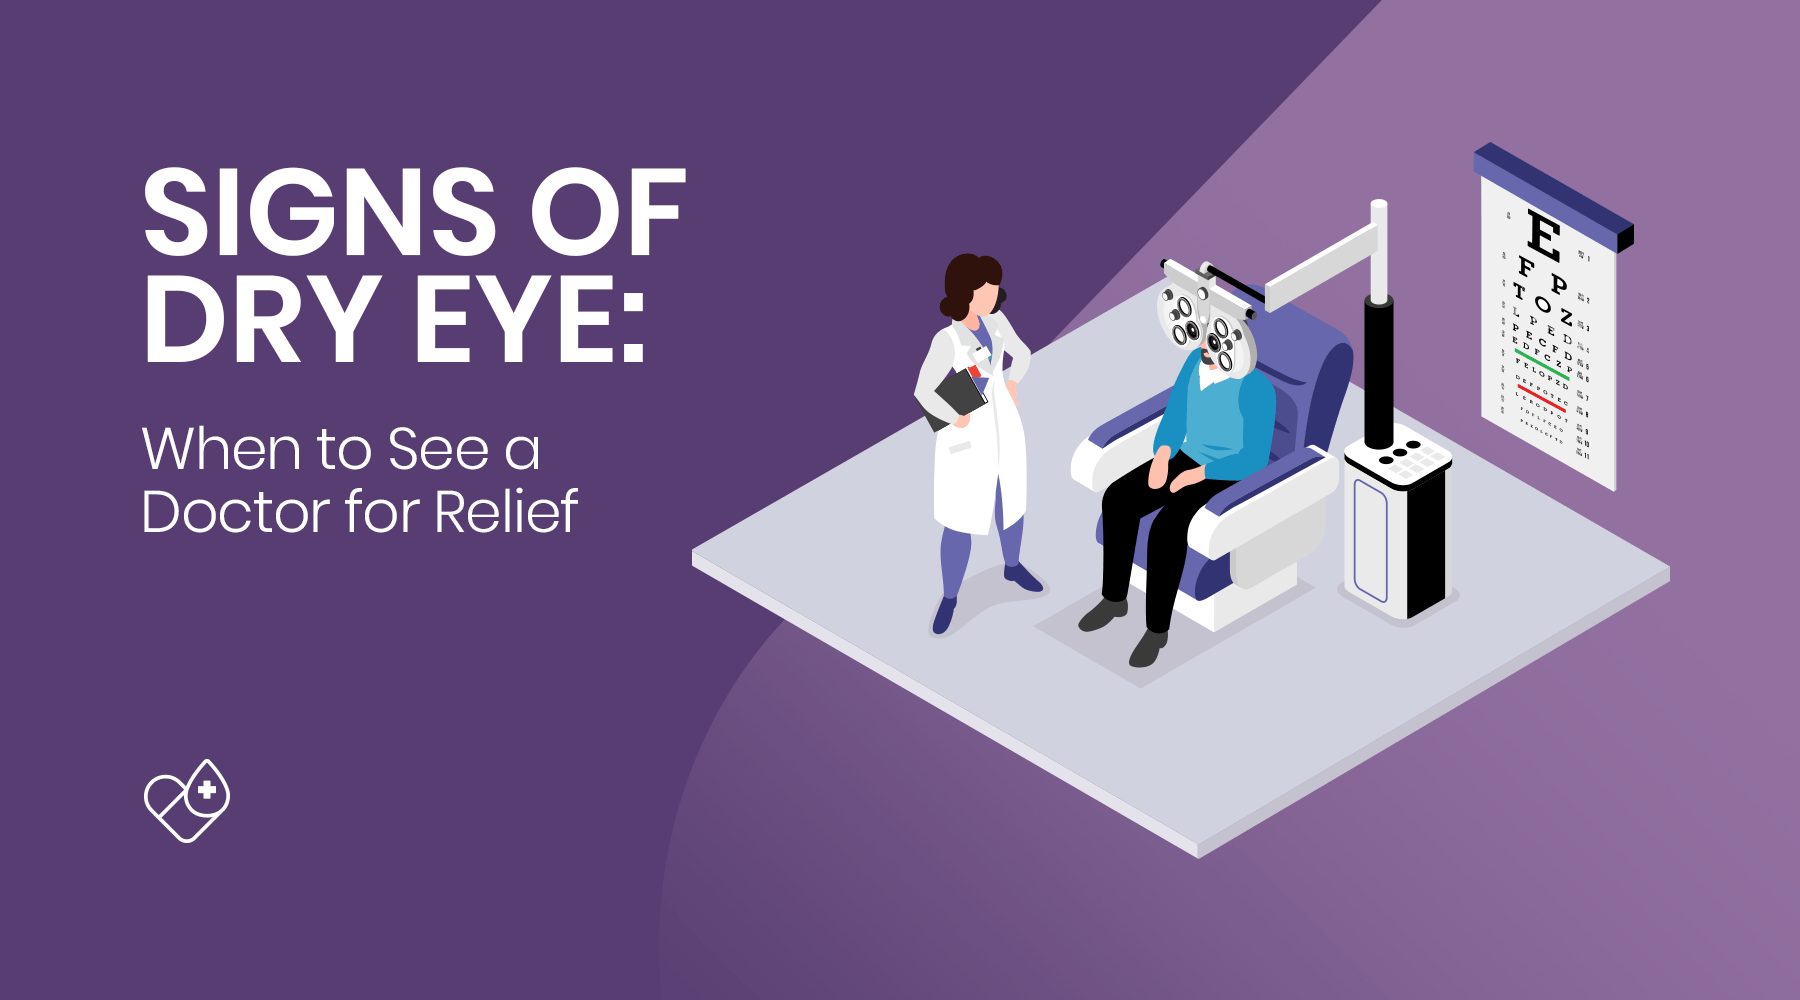 Signs of Dry Eye: When to See a Doctor for Relief - Dryeye Rescue